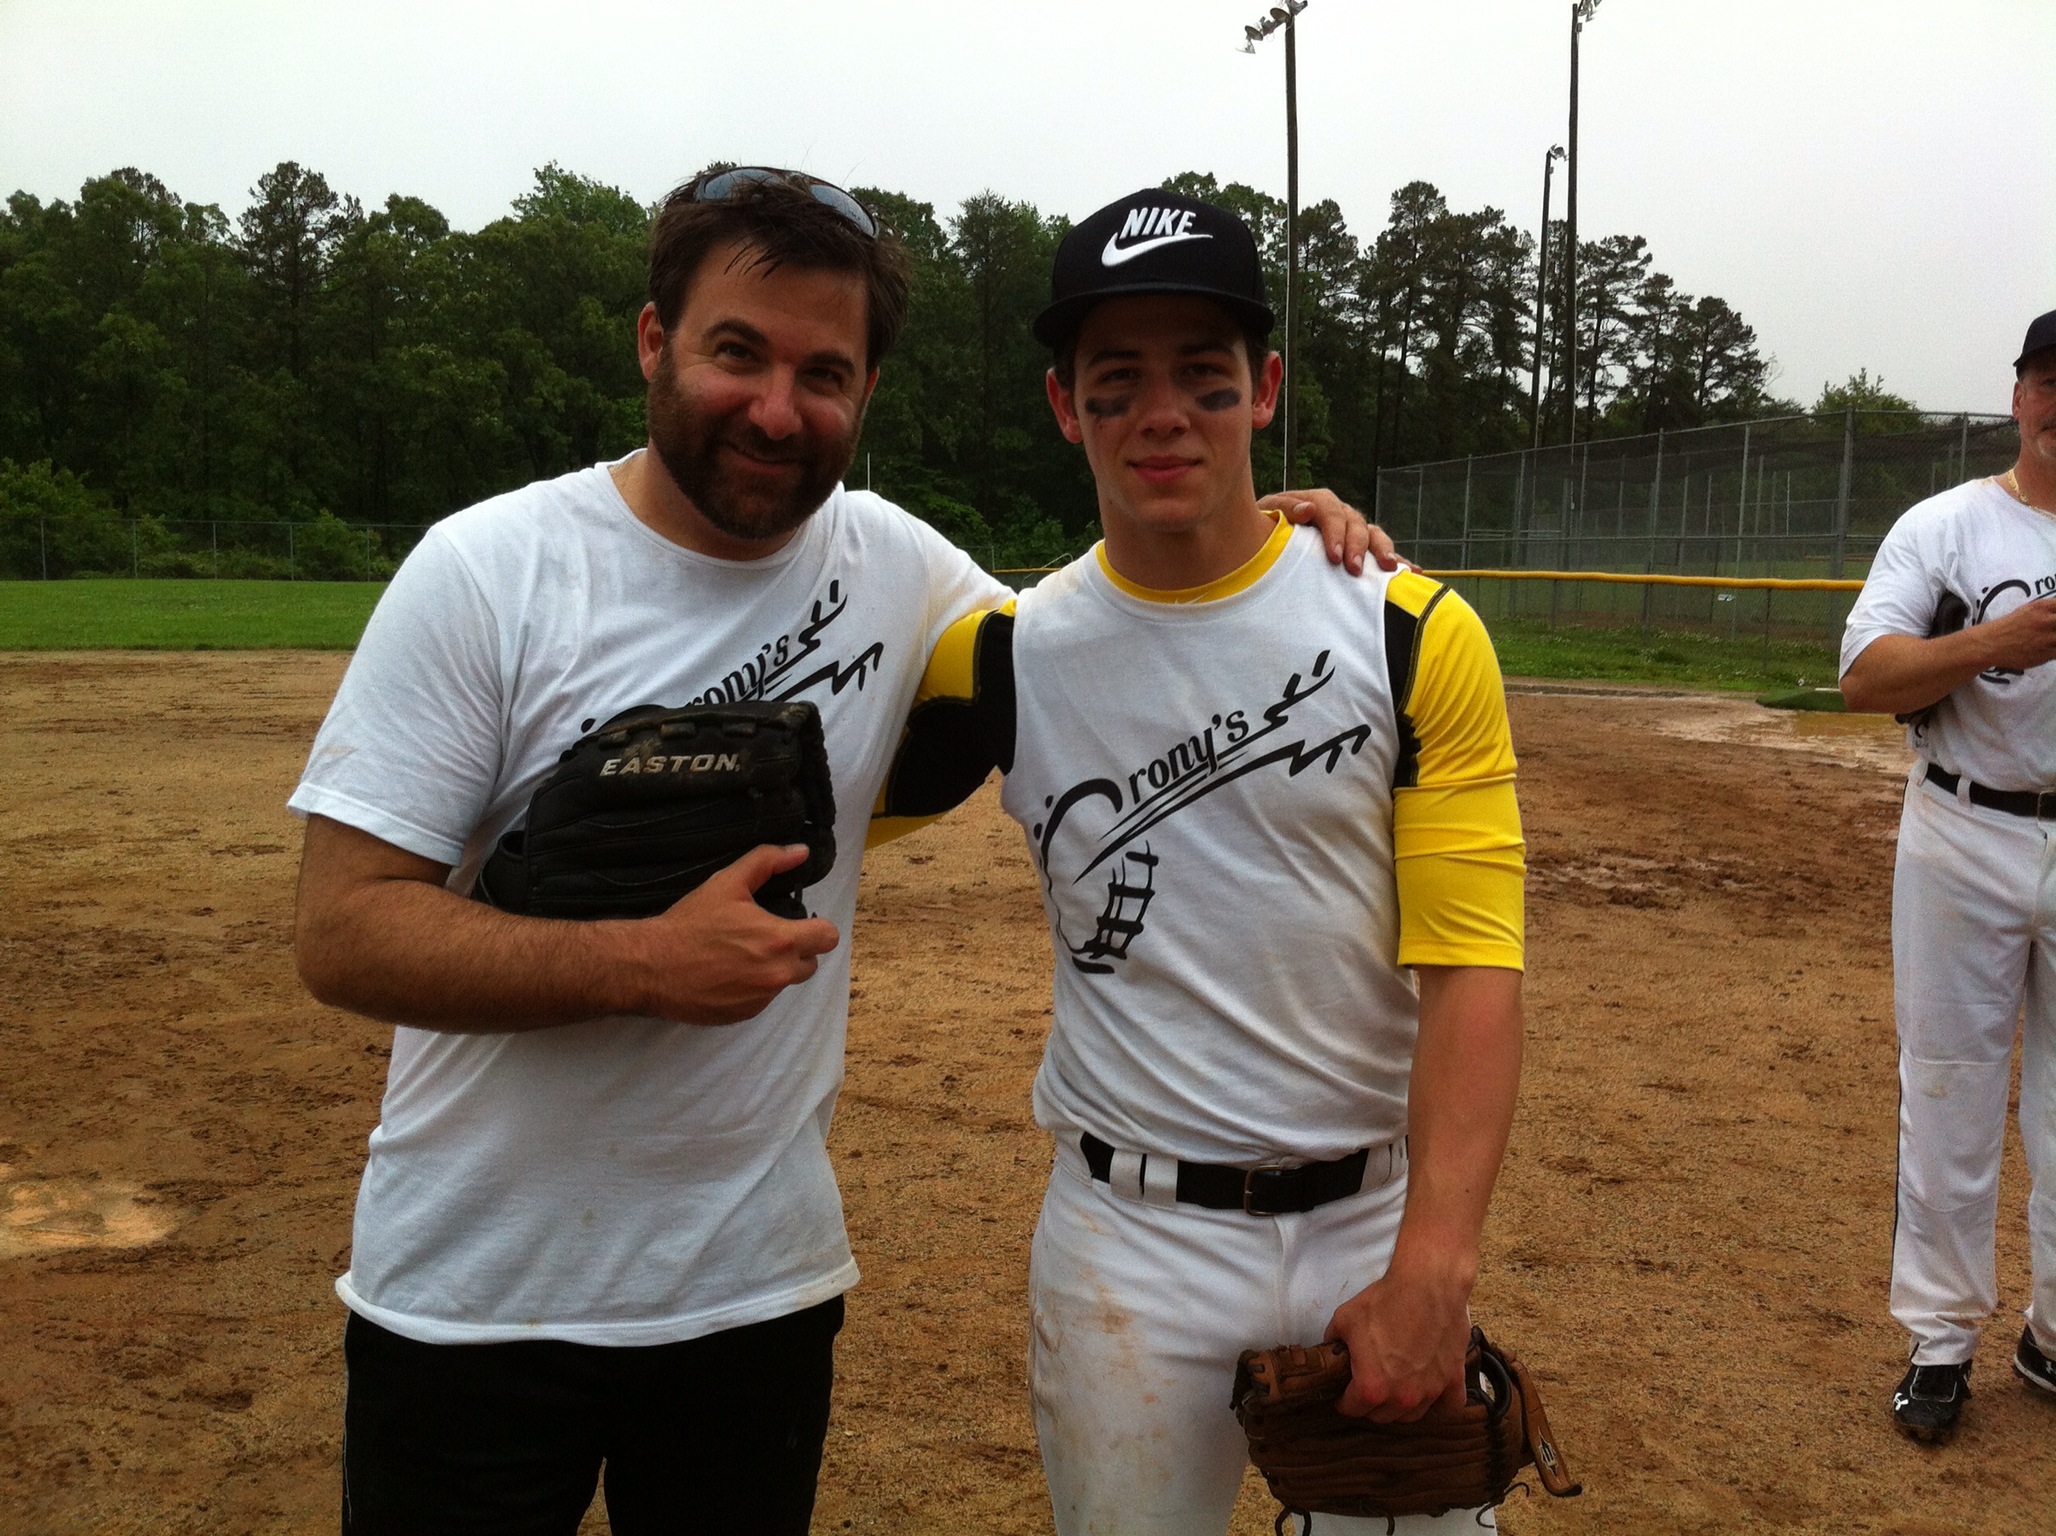 Bradley Gallo and Nick Jonas at our Crew VS UNC CHARLOTTE Softball game in Sherills Ford, North Carolina taking a break from shooting Careful What You Wish For